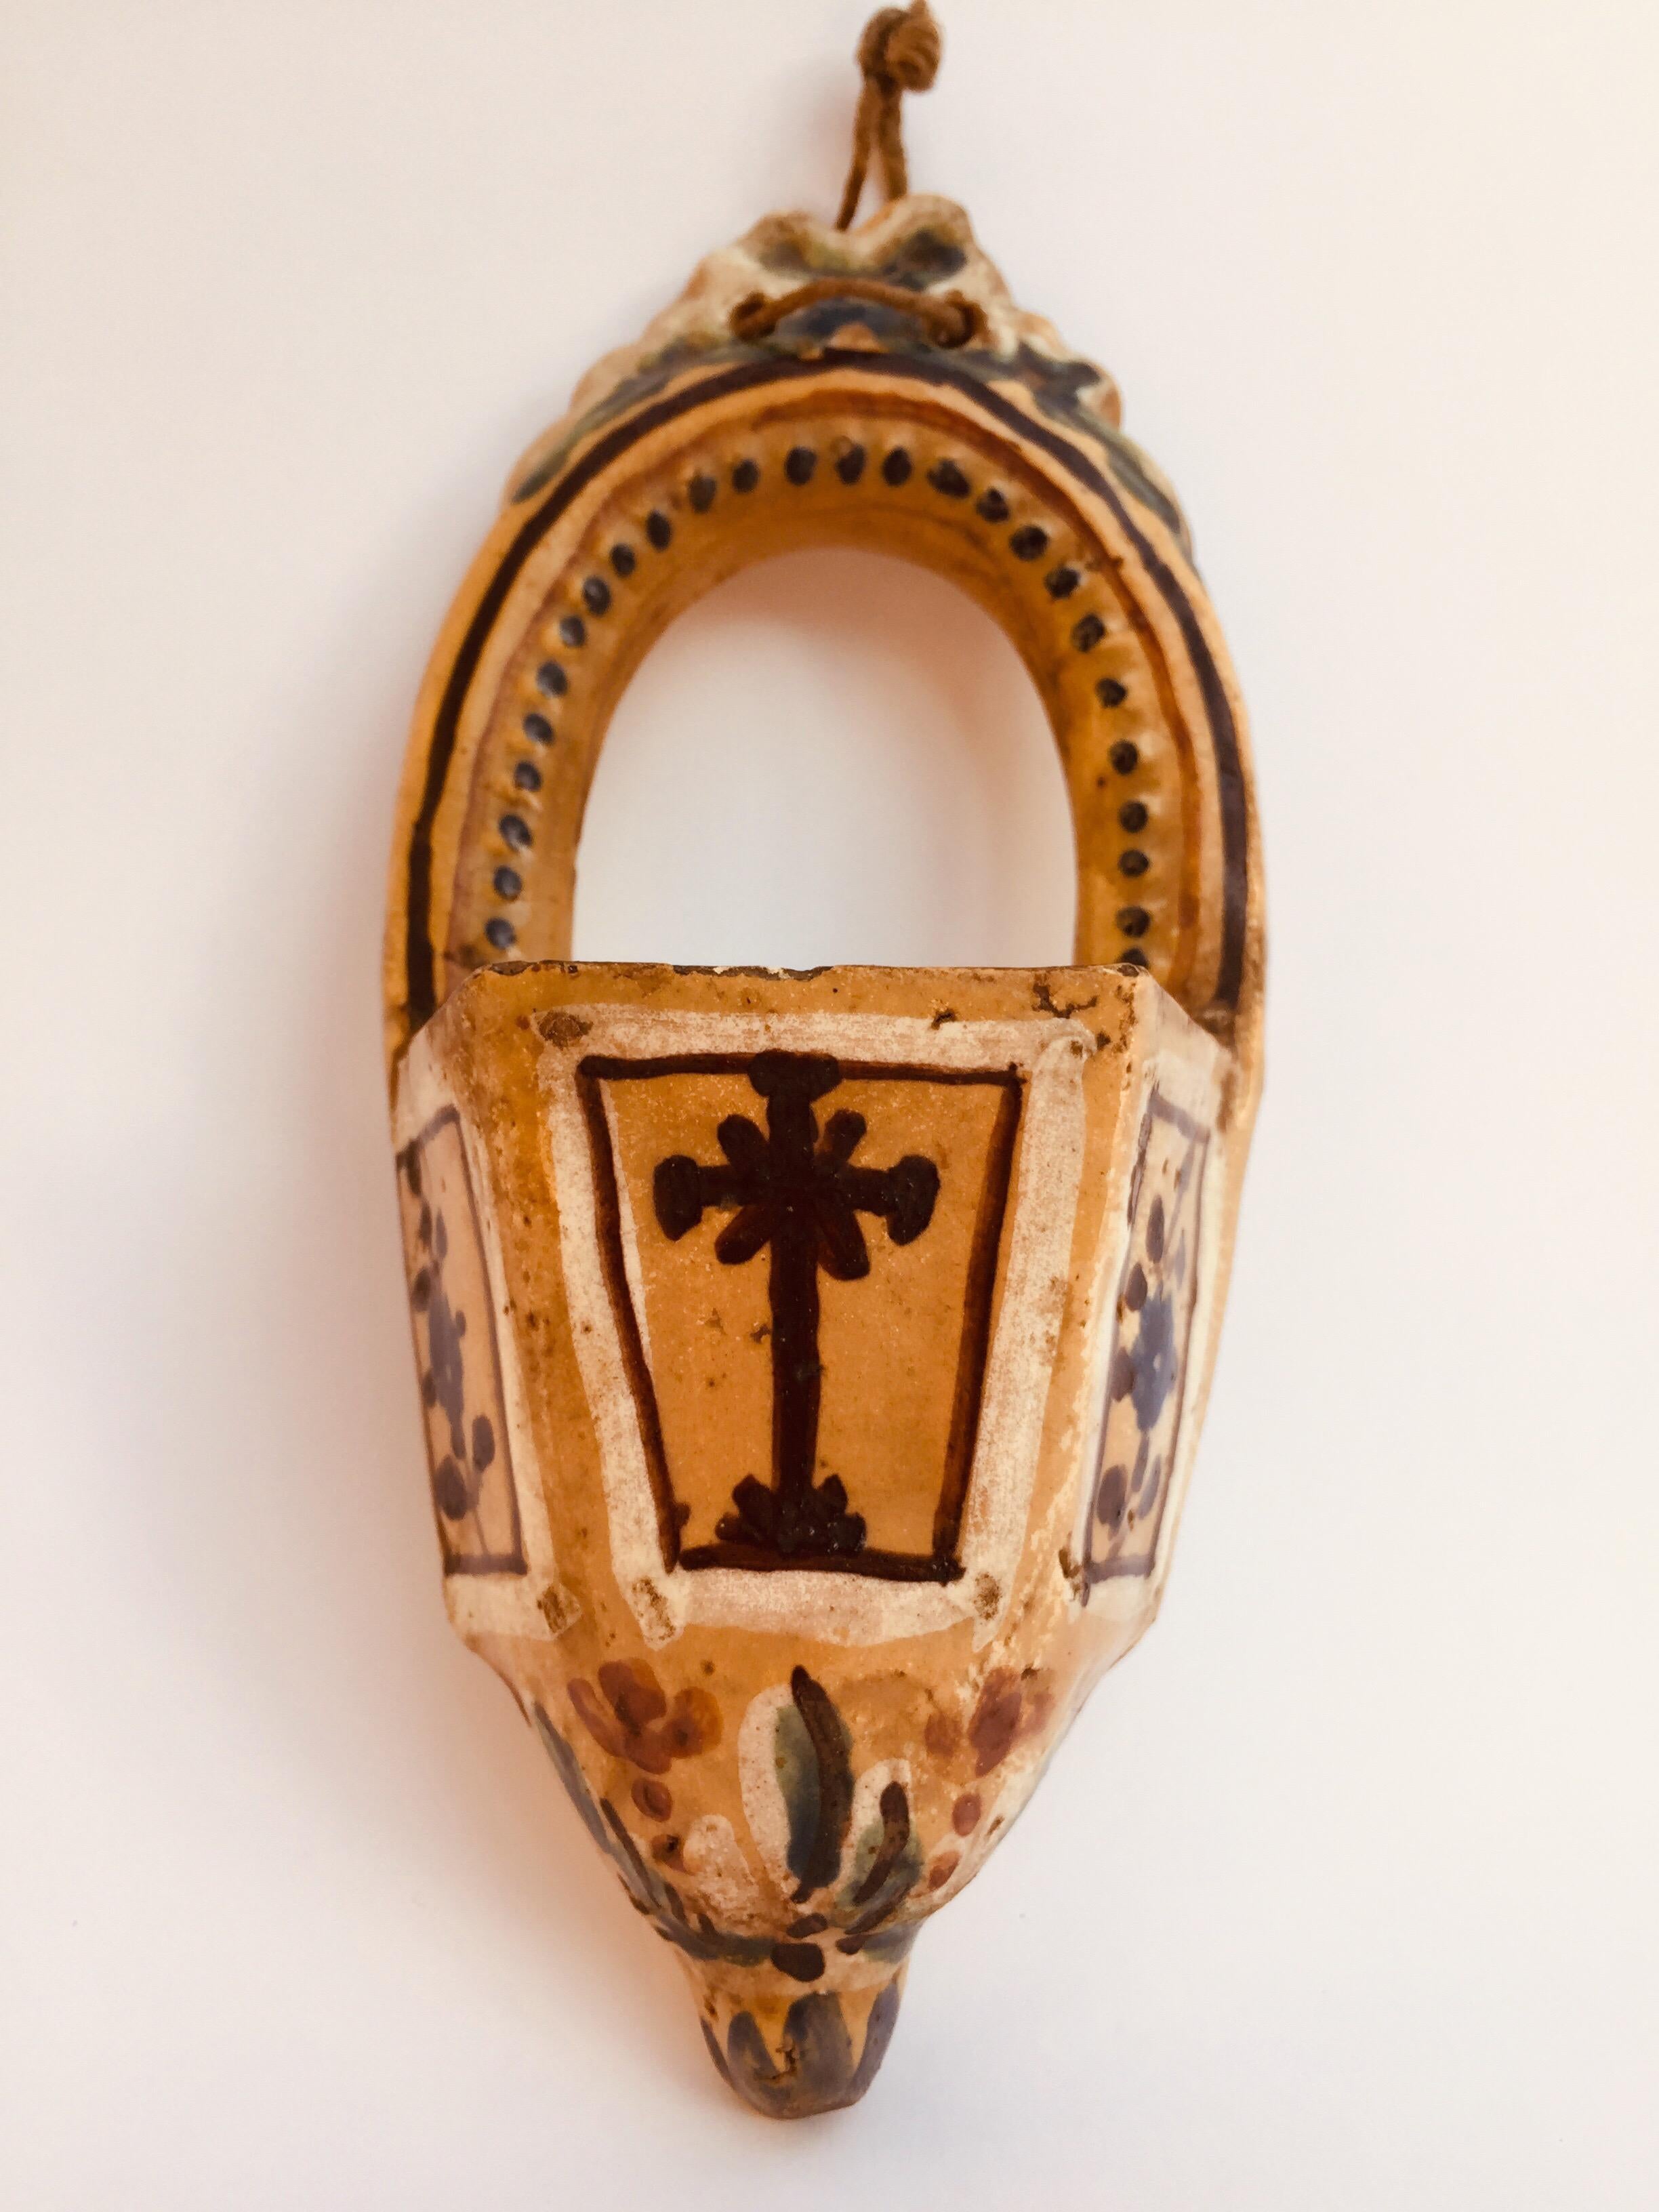 Small and lovely Italian  Holy Water font from Italy, a shaped polychrome ceramic artwork dating back to Neoclassical period, early 19th century. 
This rare religious work is finely hand painted with ocher green and beige motifs on the font, a